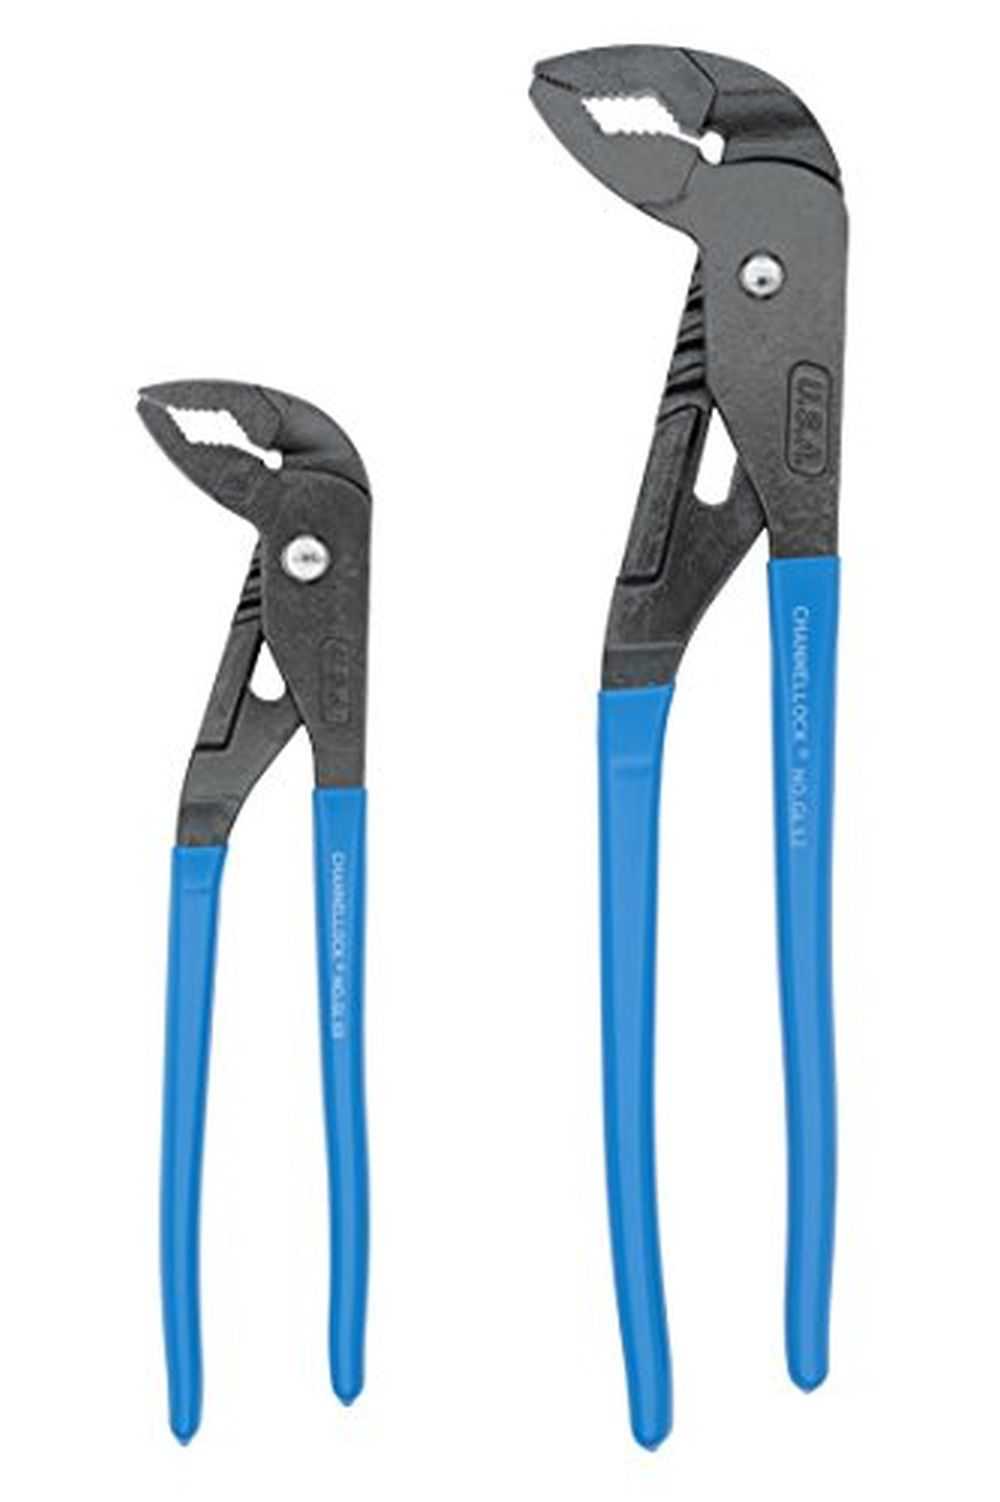 Channellock Groove Joint Pliers Set, GLS-1